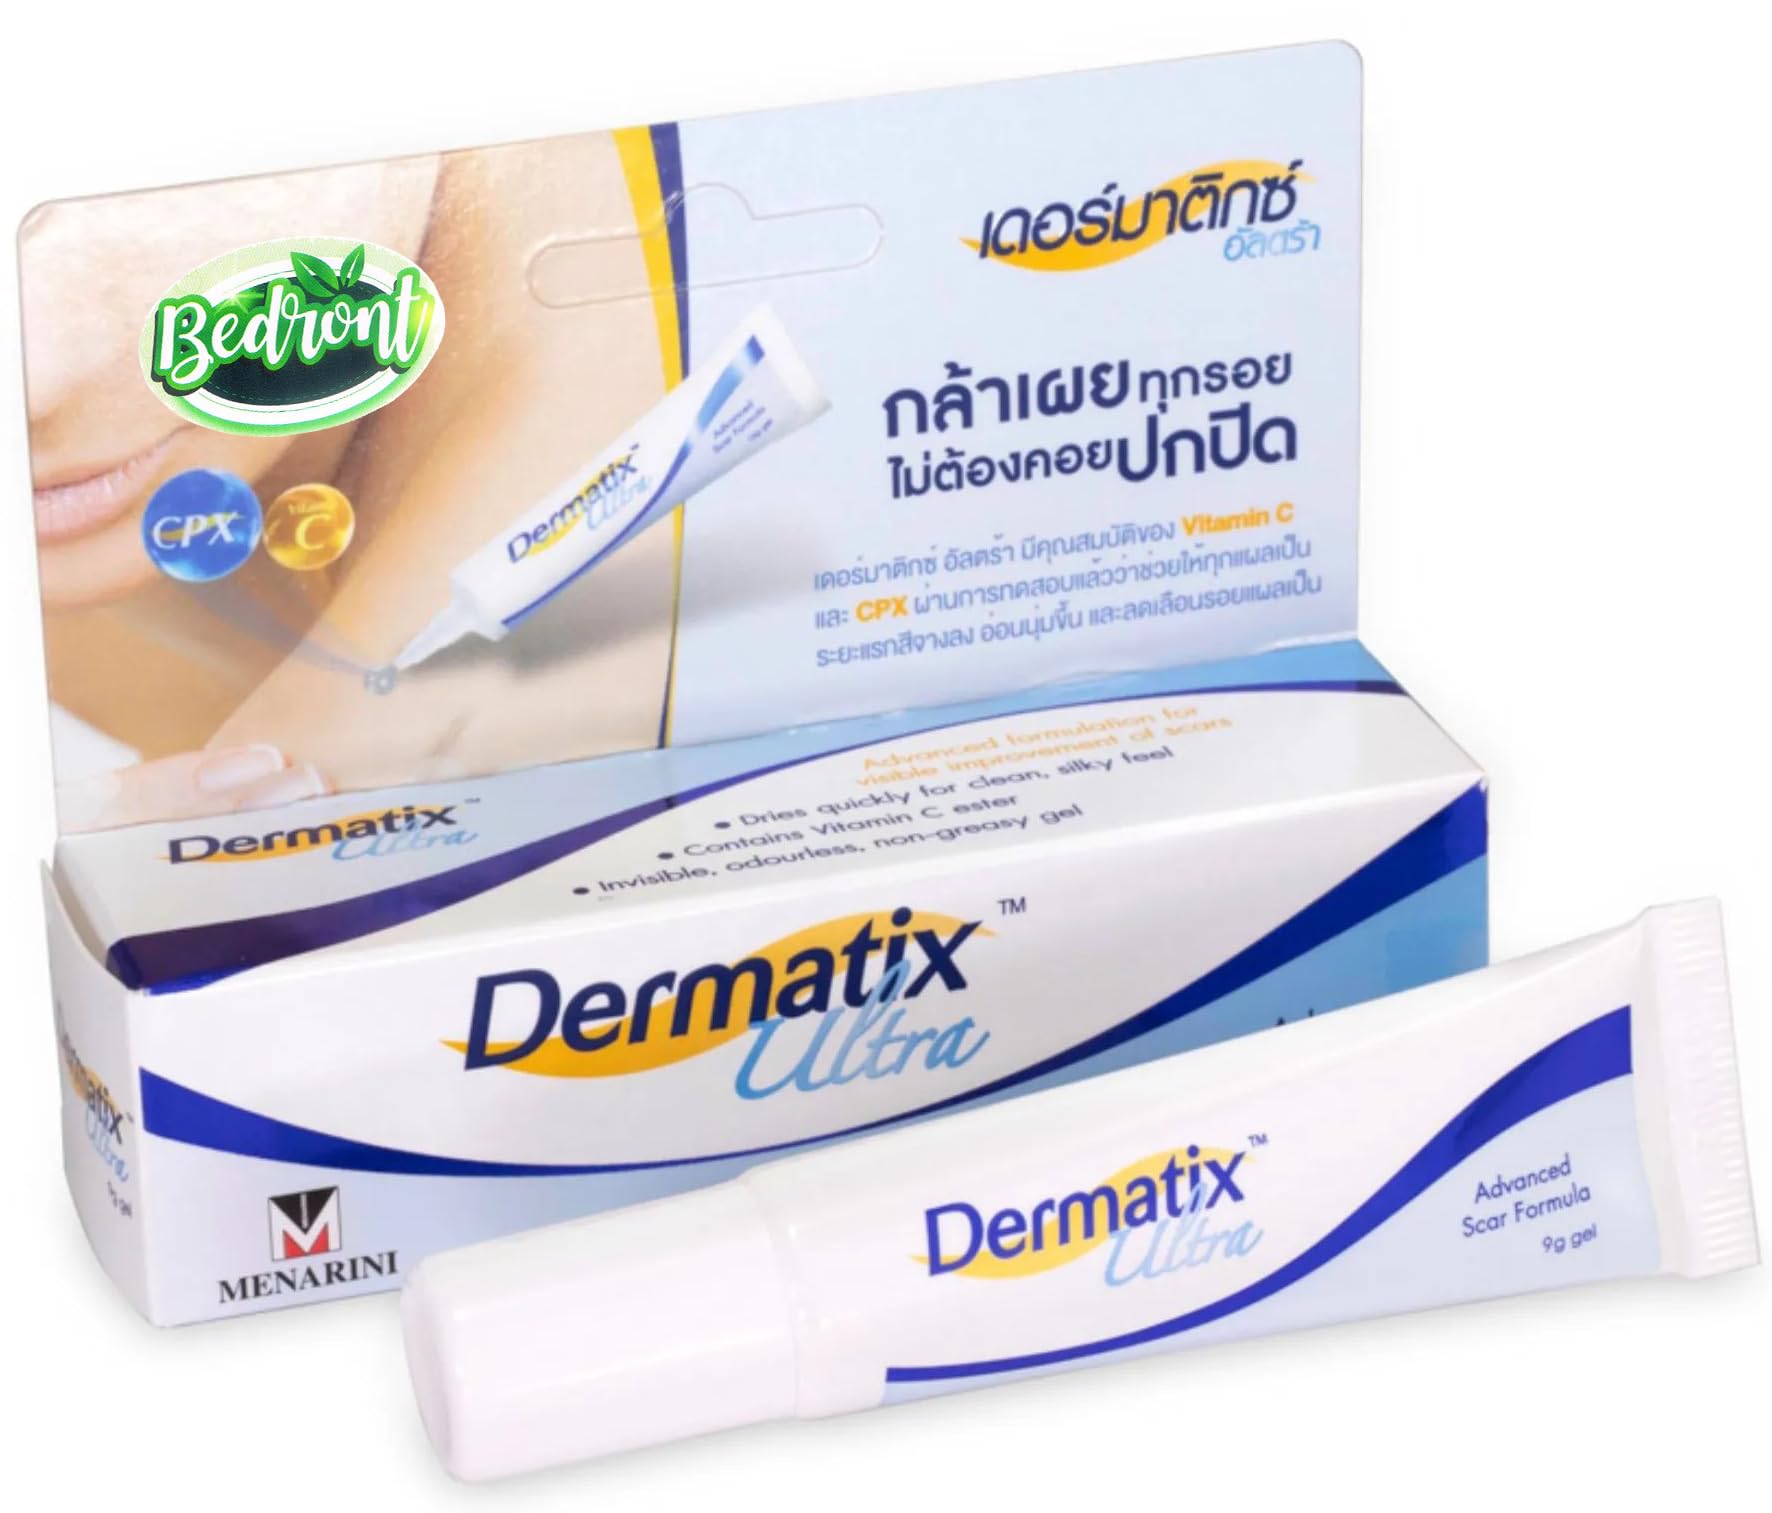 Bedront Special Advanced Formula Thai Dermatix Ultra Silicone Gel for Cosmetic Improvement of Keloids, Surgical, Burn & Hypertrophic Scars, Made in USA (15 grams)